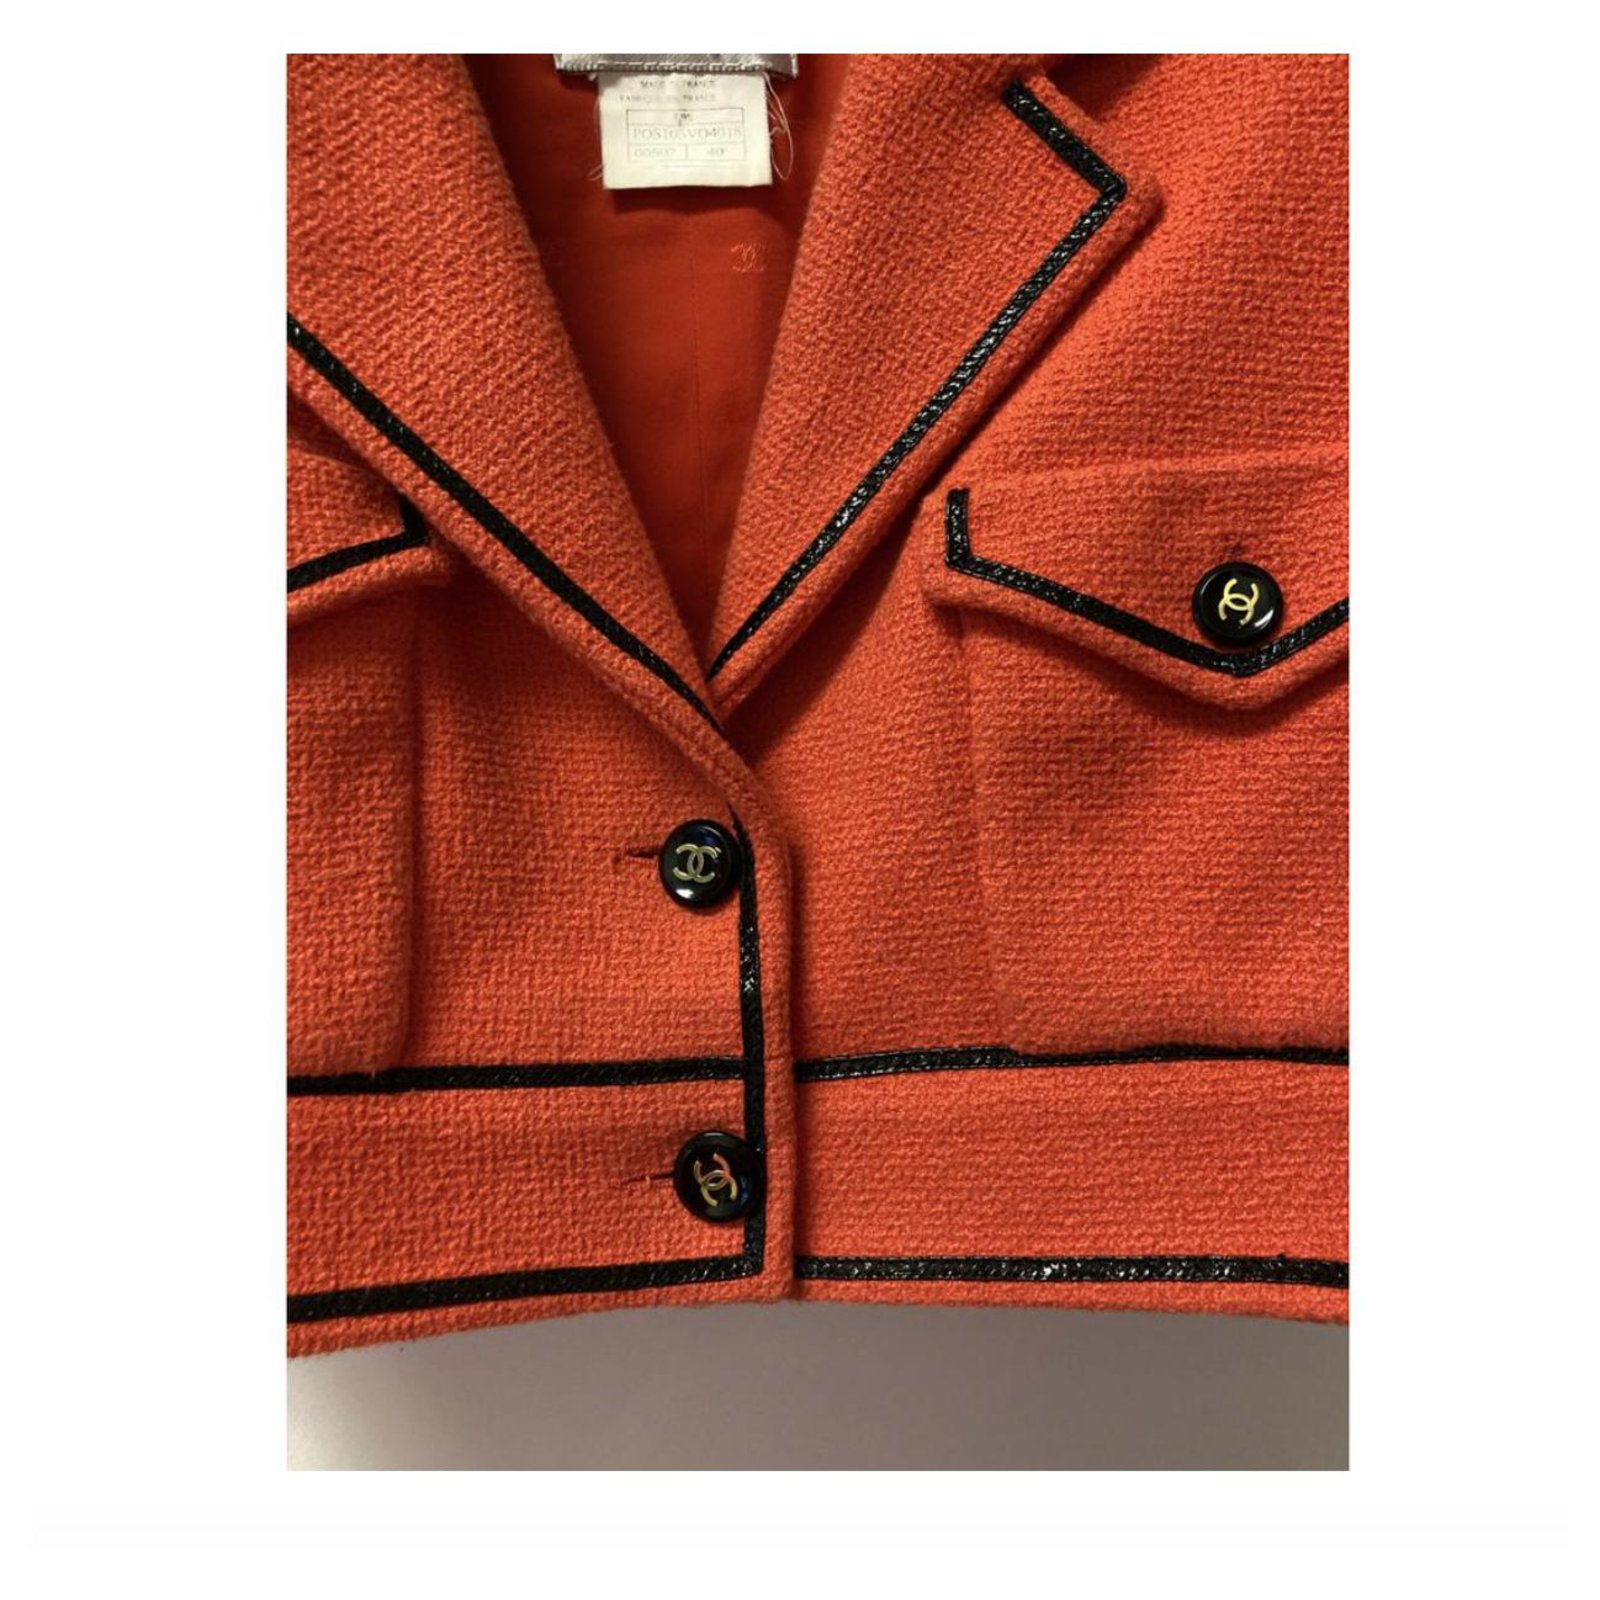 BARBIE COLLECTION Gorgeous coral red SPRING 1995 CHANEL RUNWAY JACKET